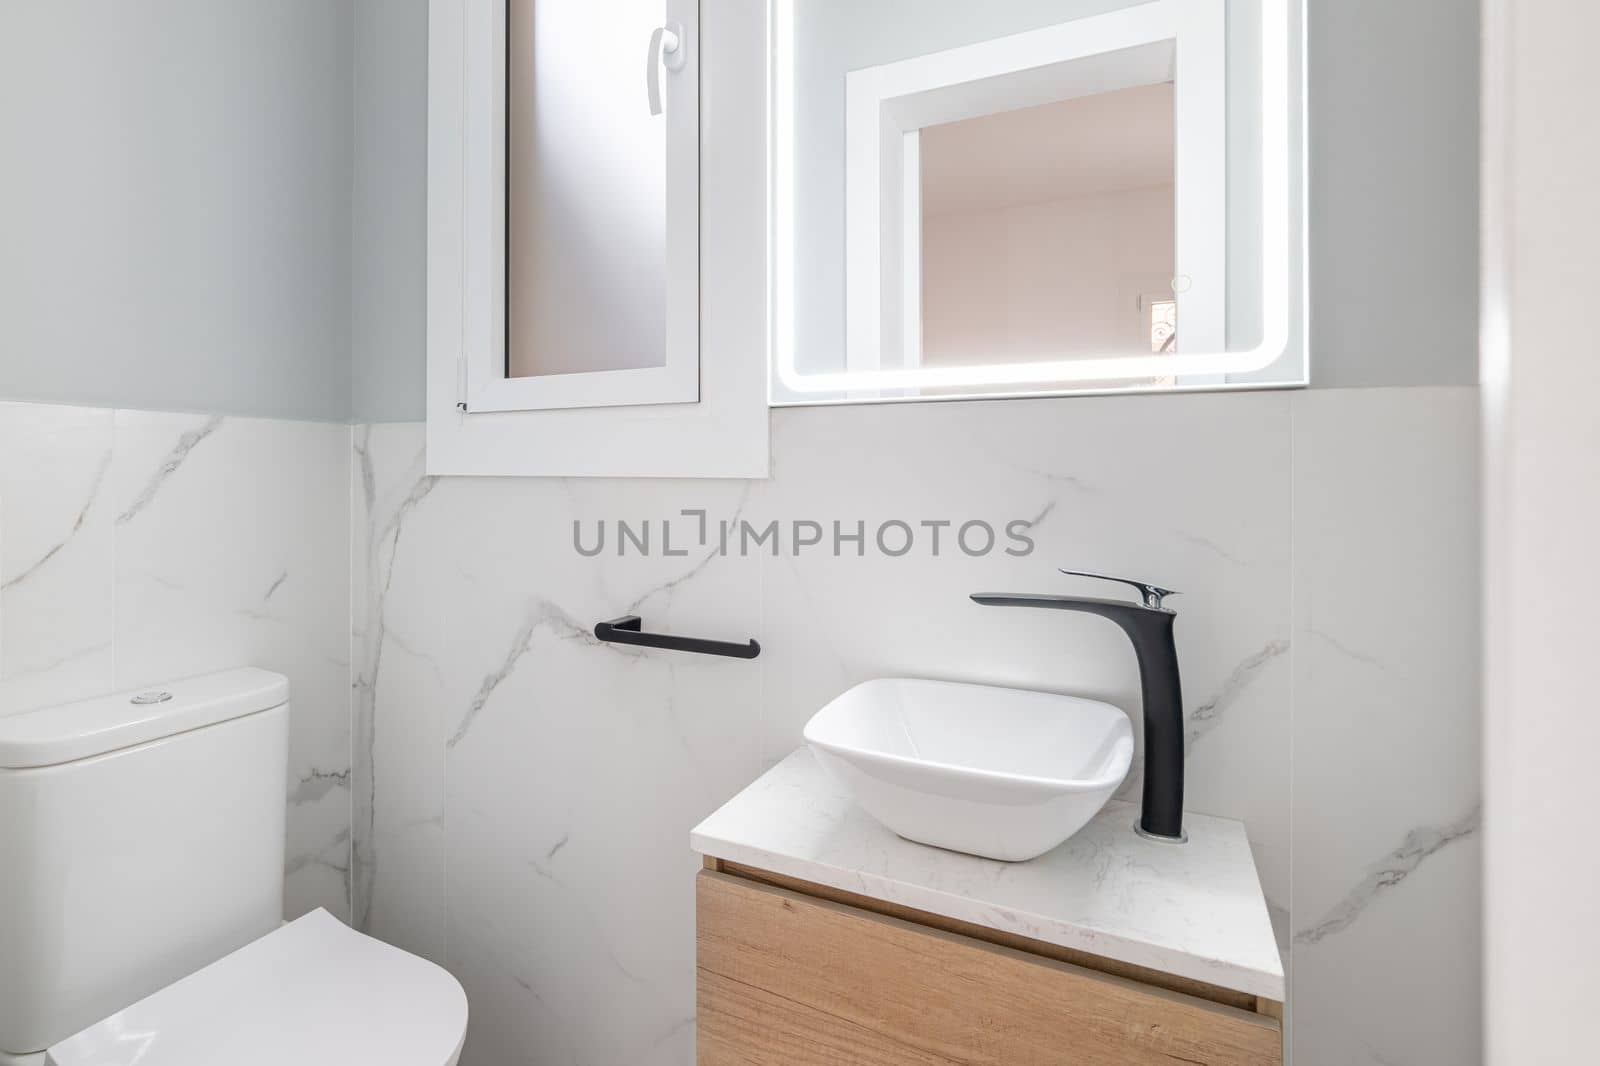 Small bathroom with toilet and designer sink on small vanity with black faucet. Walls of room are made of white natural marble tiles. Square mirror is illuminated with fluorescent light. by apavlin